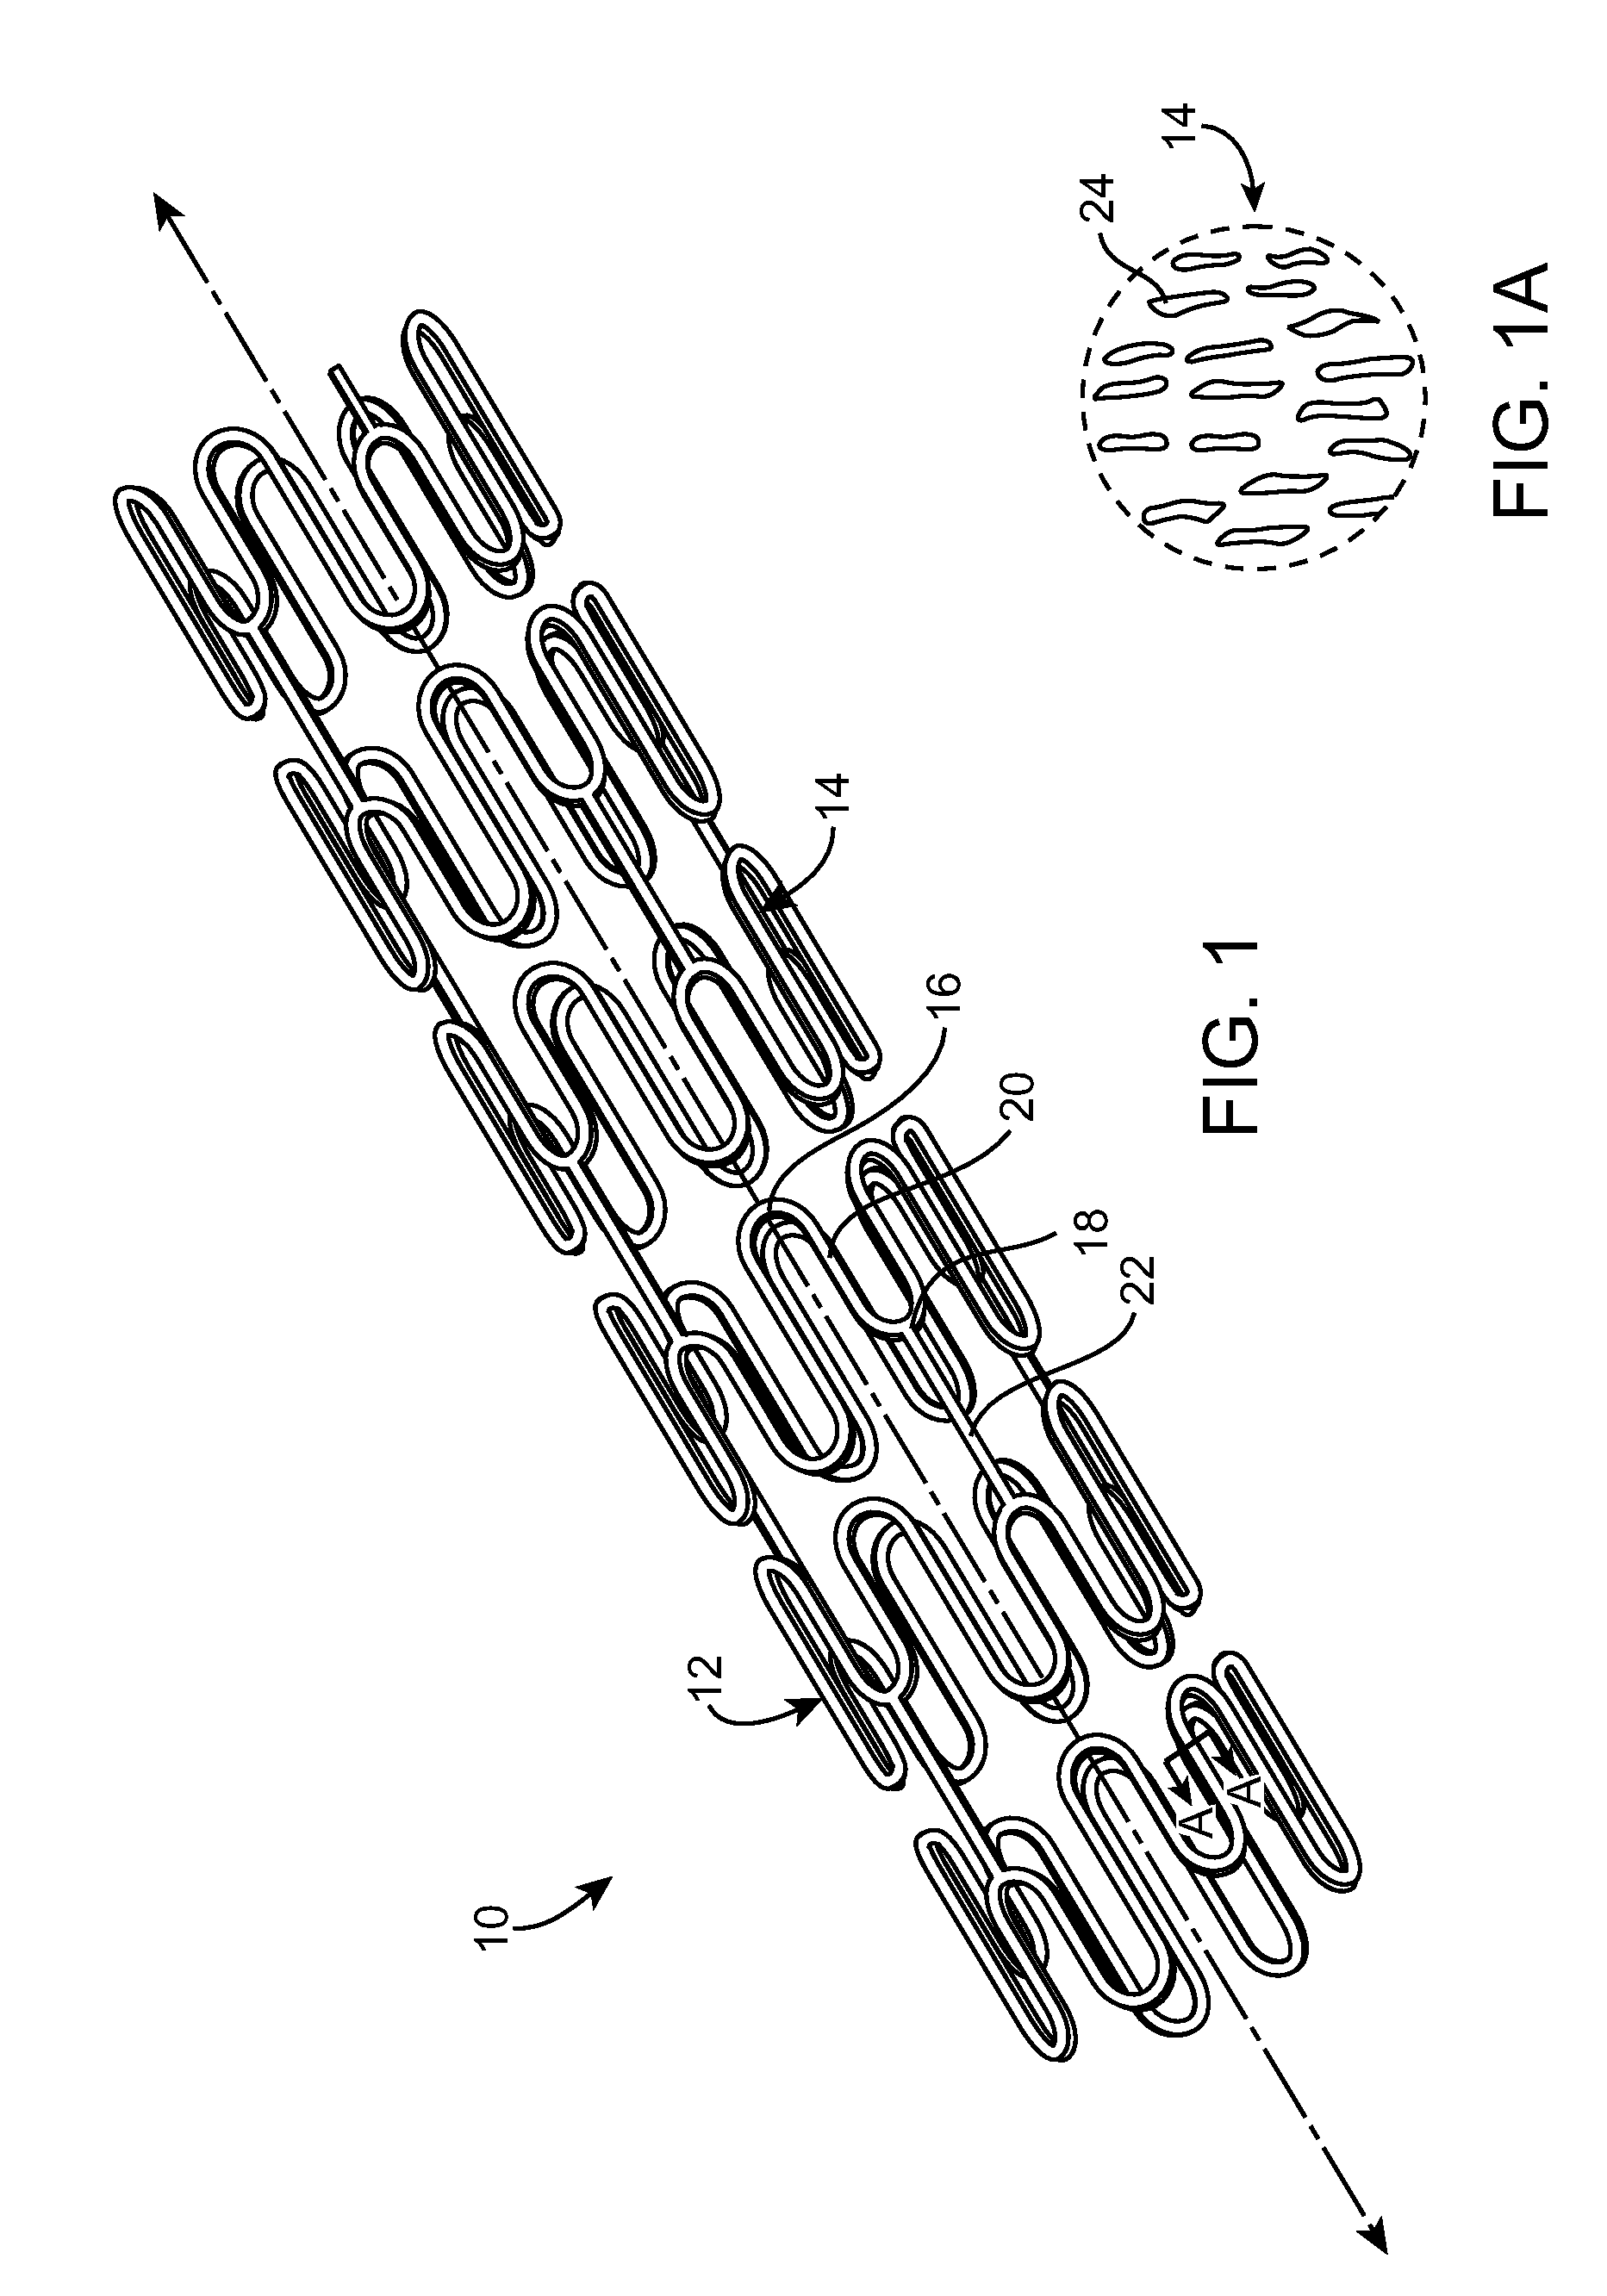 Stent Having Controlled Porosity for Improved Ductility